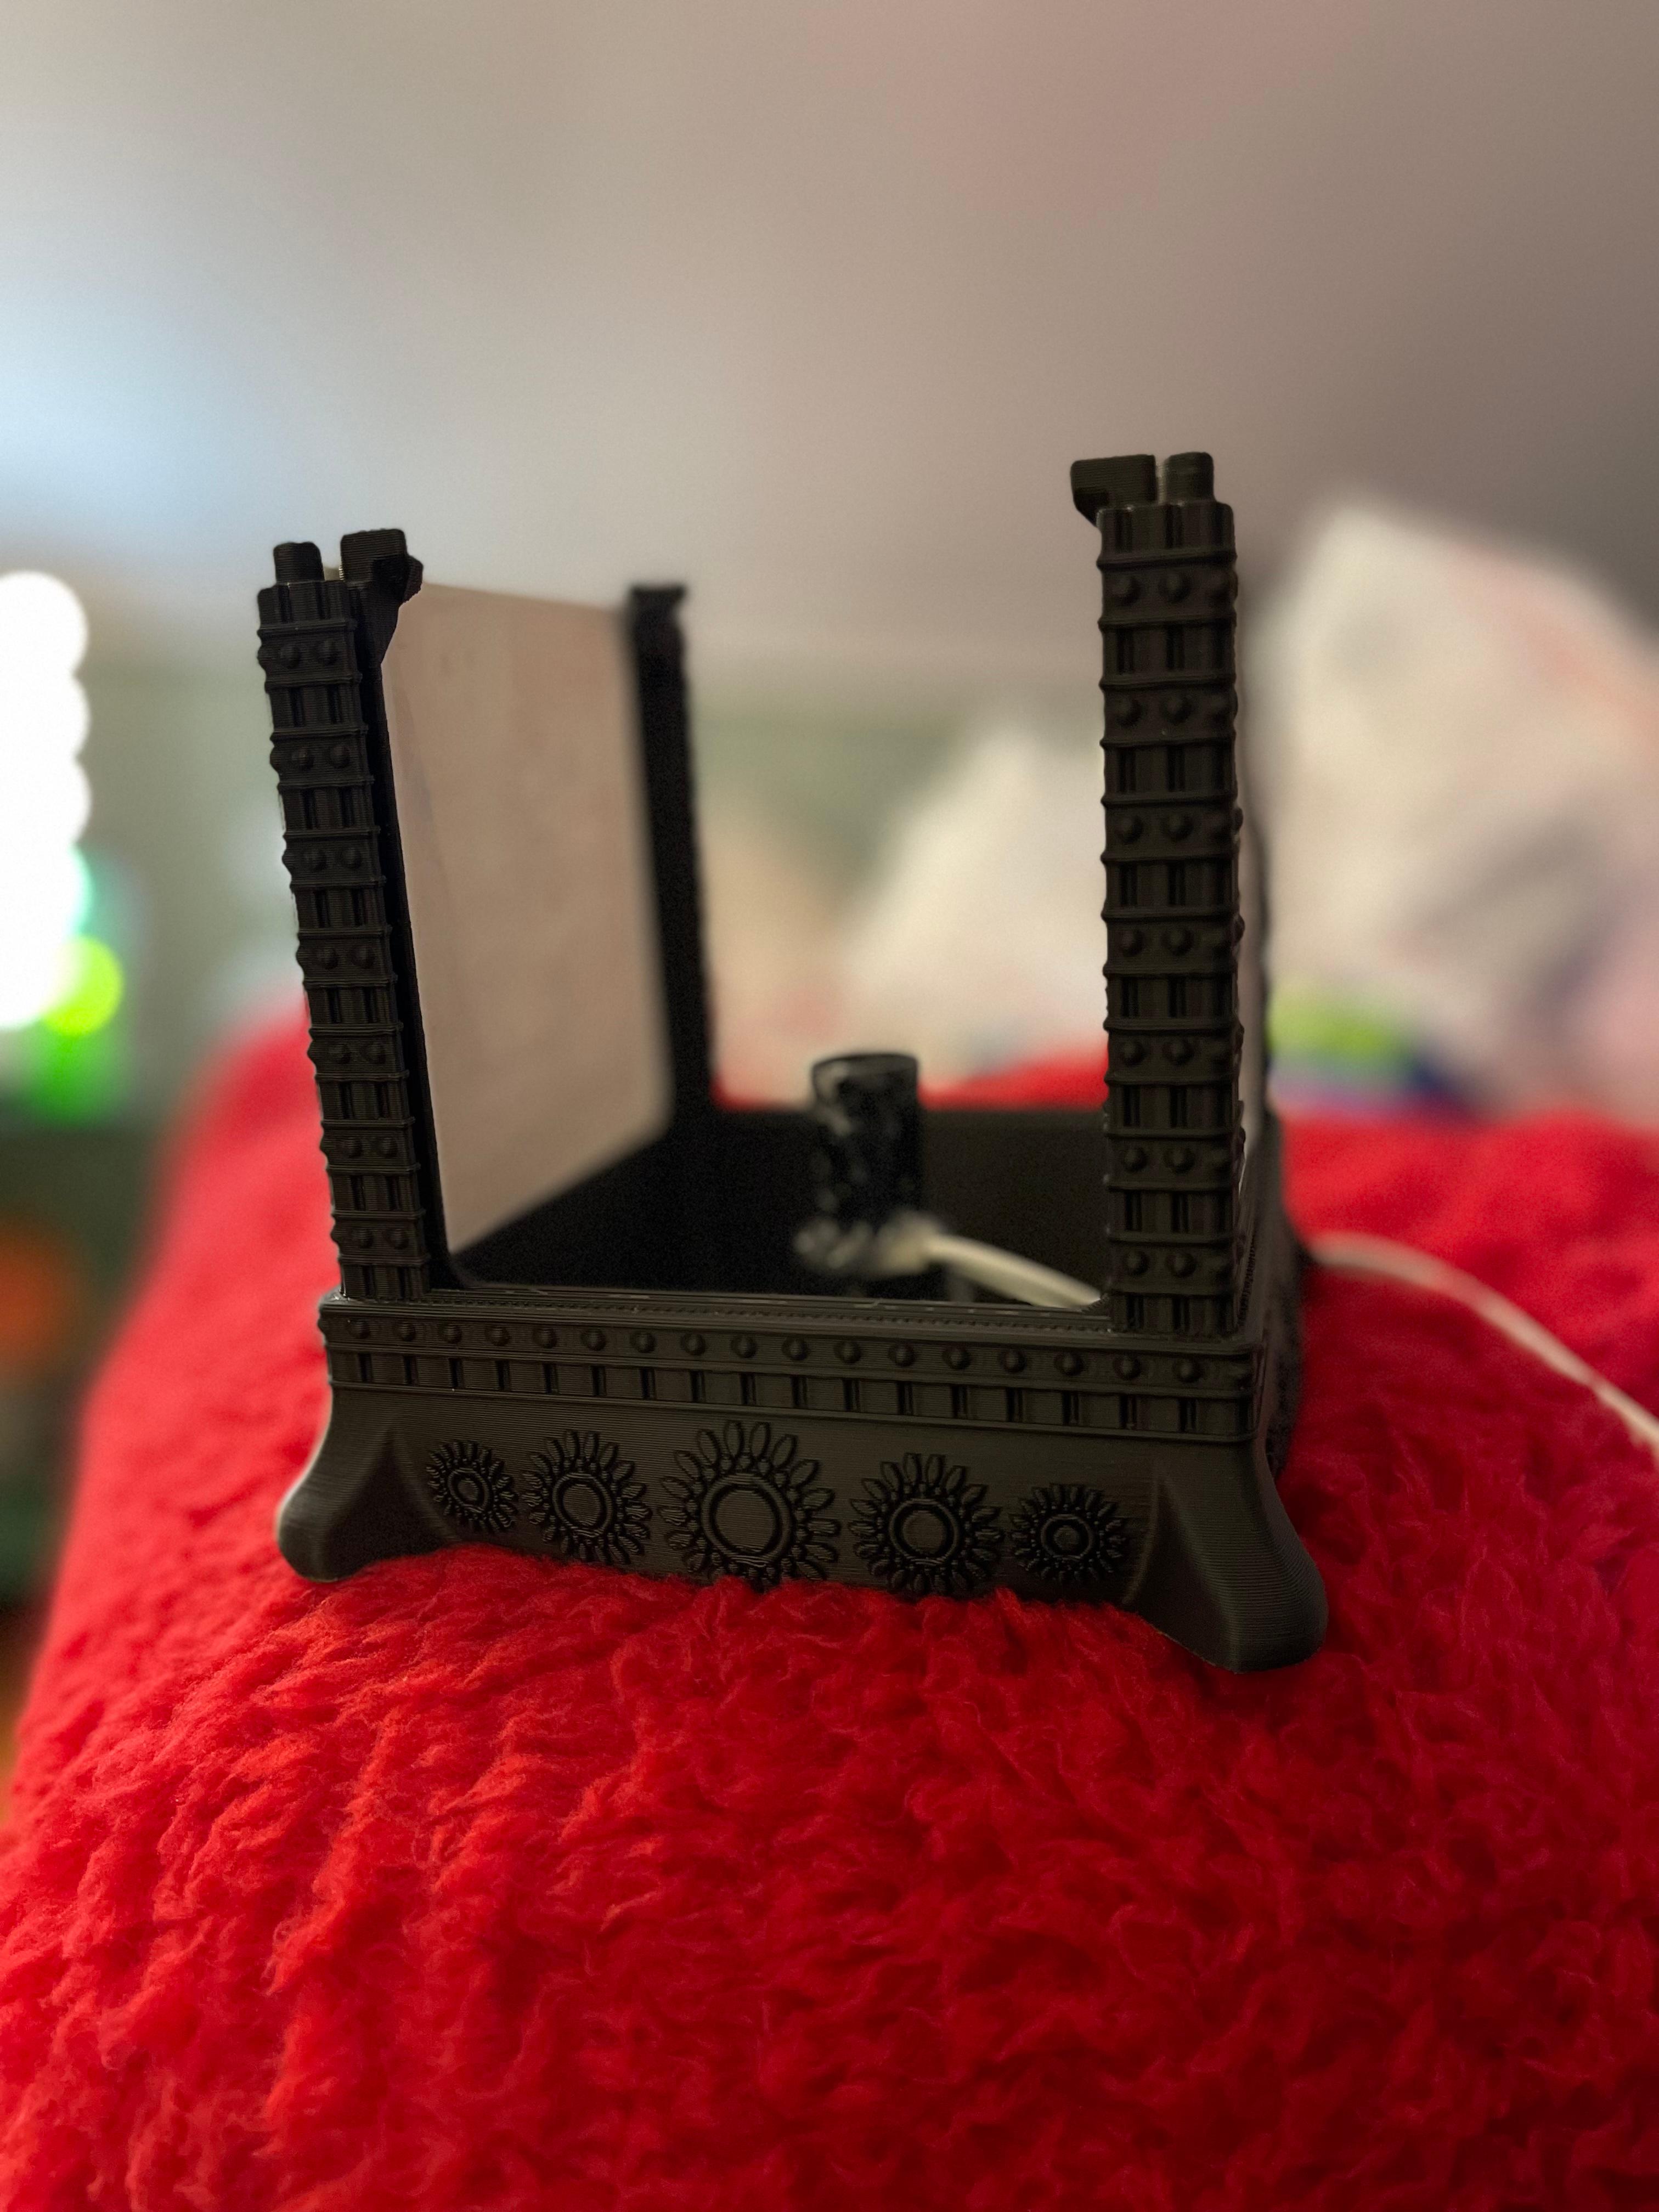 Gothic Lithophane Light - Printed great. 220° hot end 60° bed. Bought ZIRO matte black filament last minute from Amazon and it looks amazing. Need to re print lithos slower, it was a last minute gift! Thanks for the design!! - 3d model